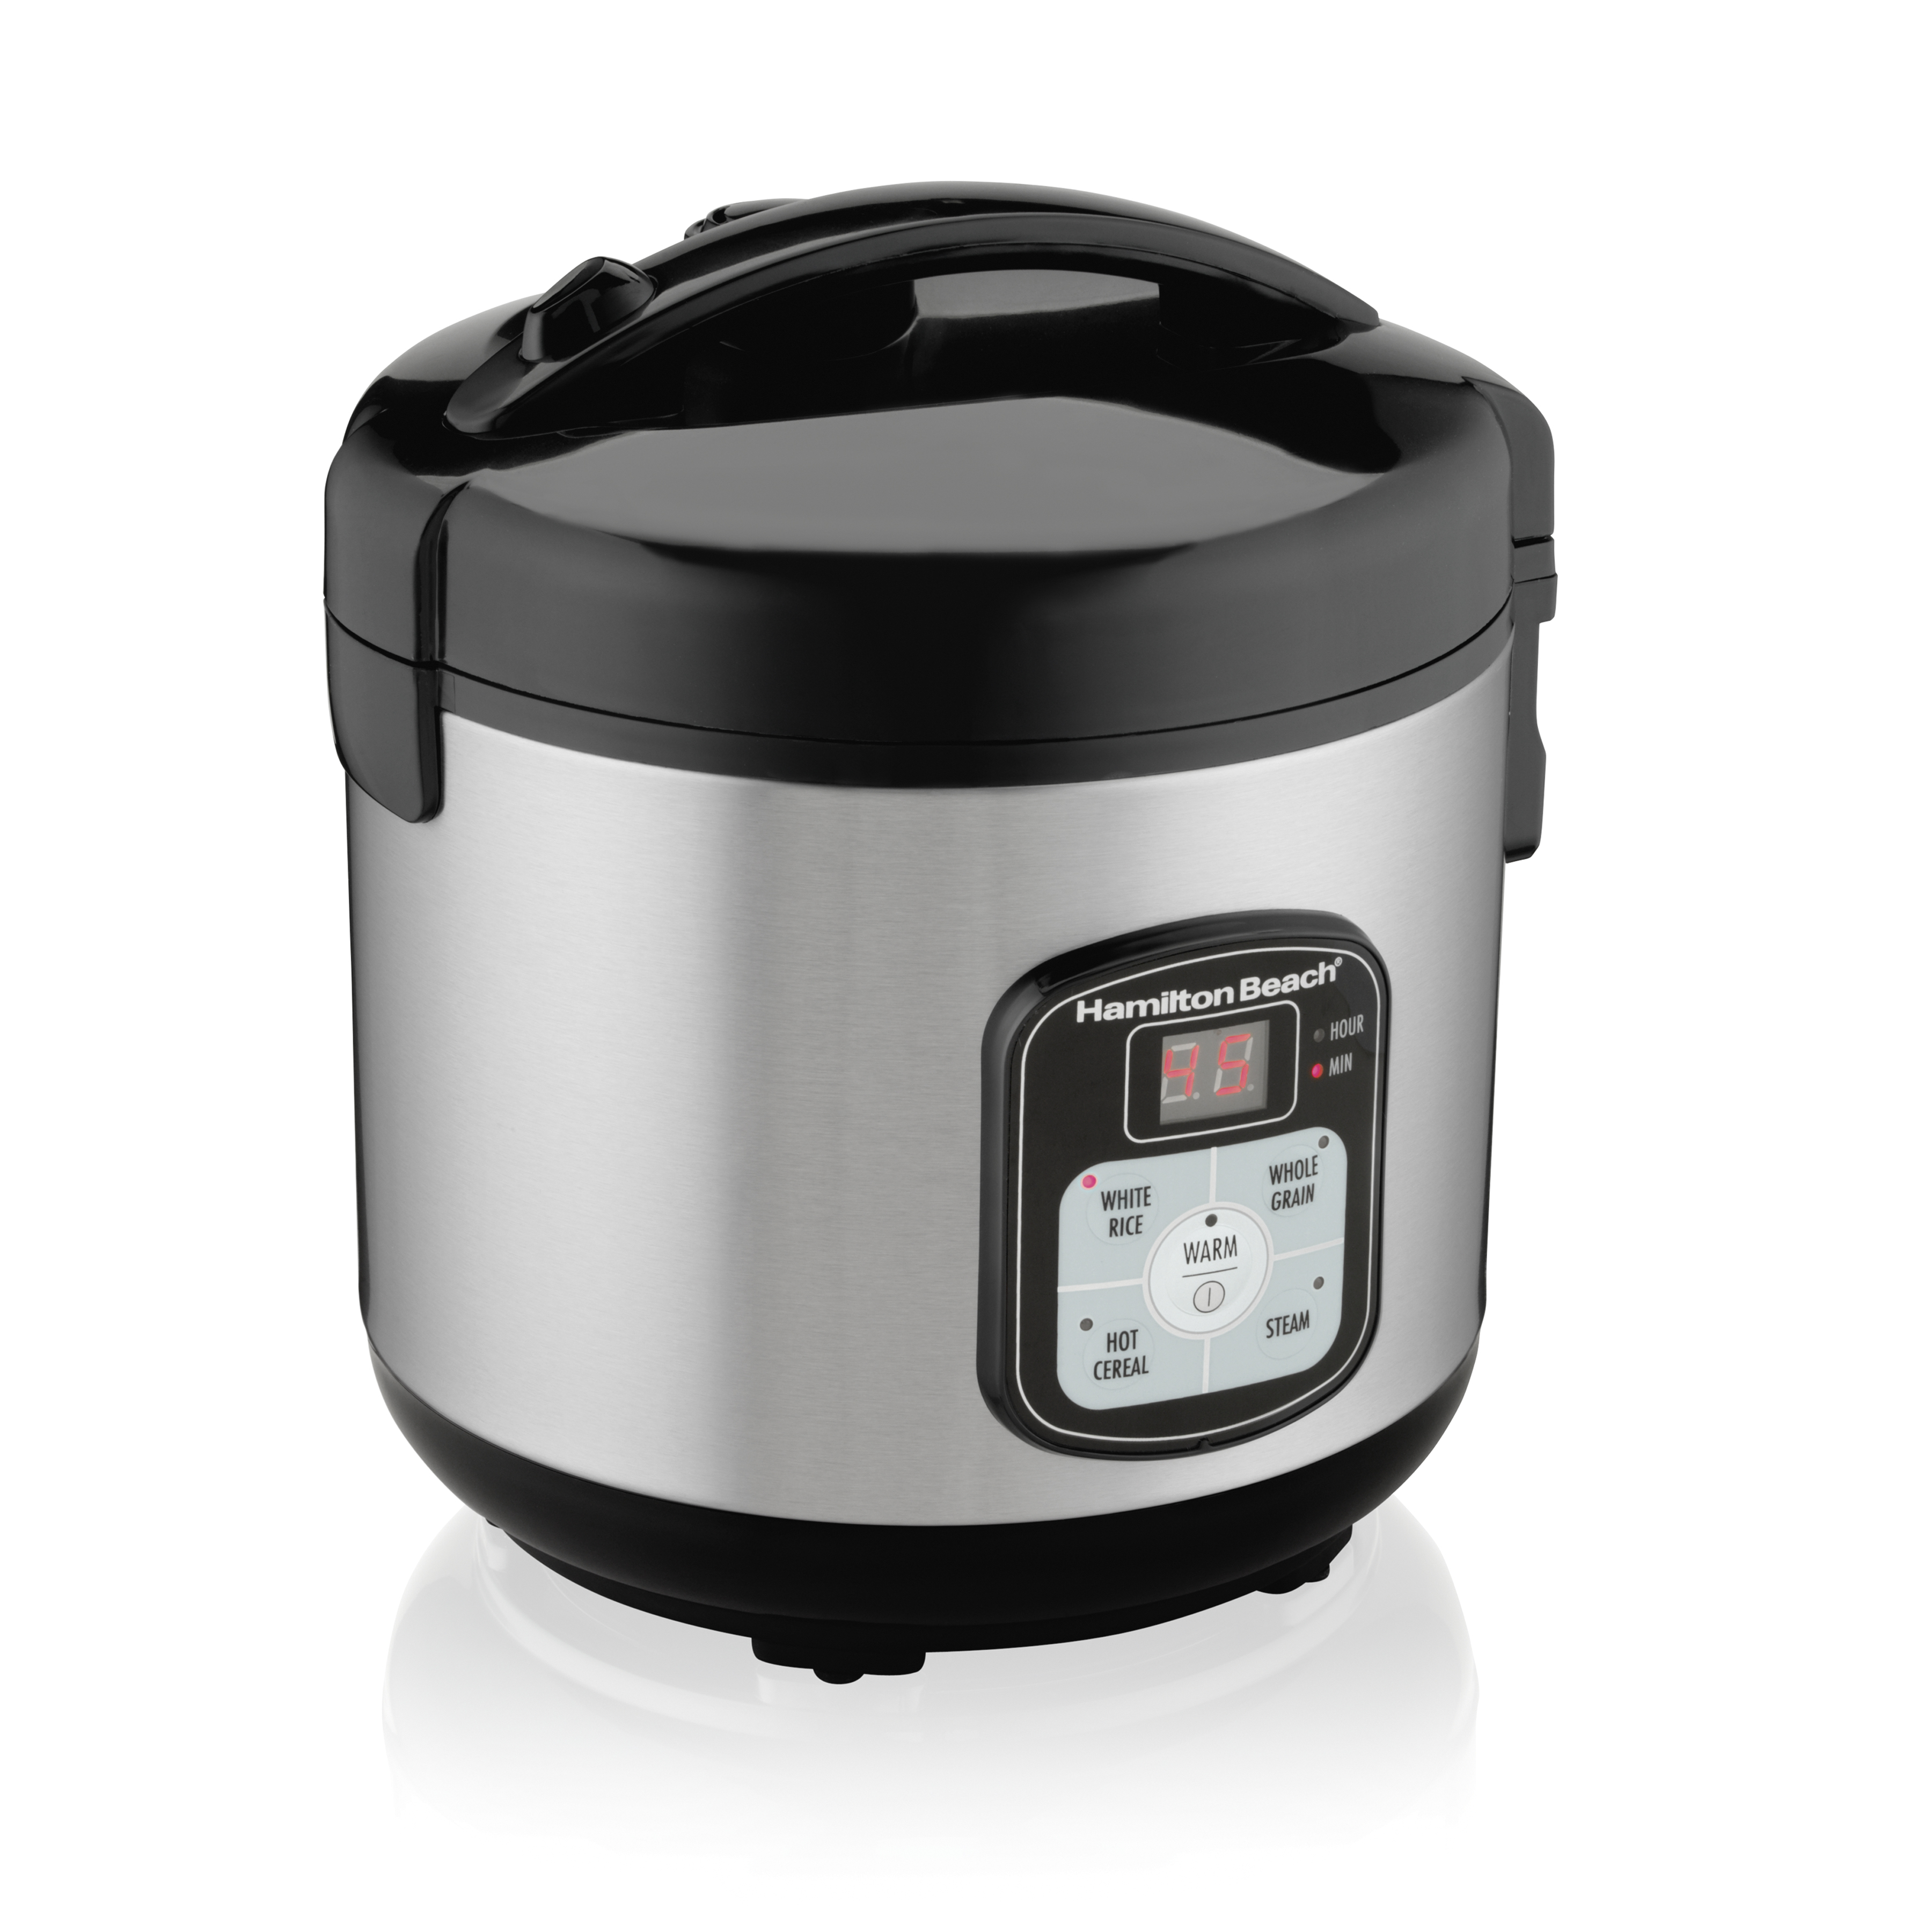 Hamilton Beach Rice Cooker & Food Steamer, Digital Programmable, 8 Cups Cooked (4 Uncooked), Steam & Rinse Basket, Stainless Steel, 37519 - image 1 of 8